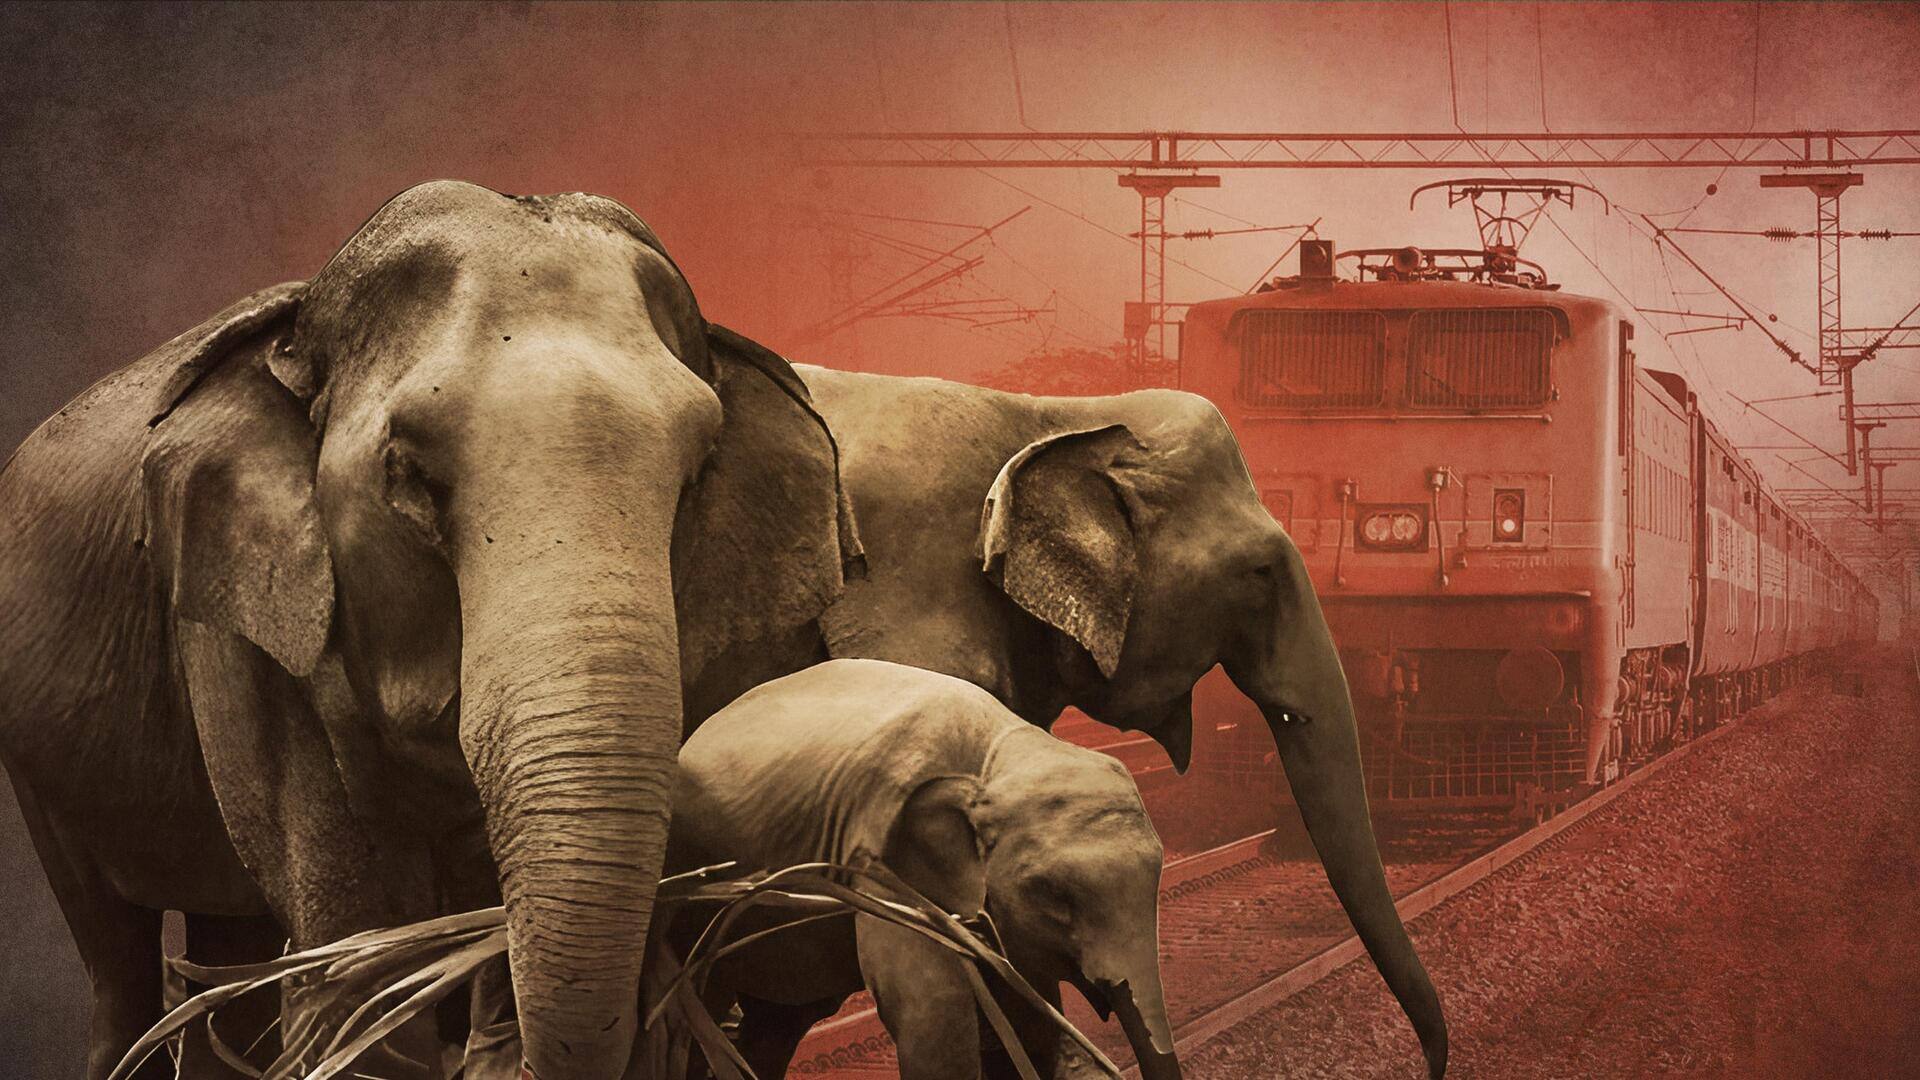 West Bengal: 3 elephants killed after being hit by train